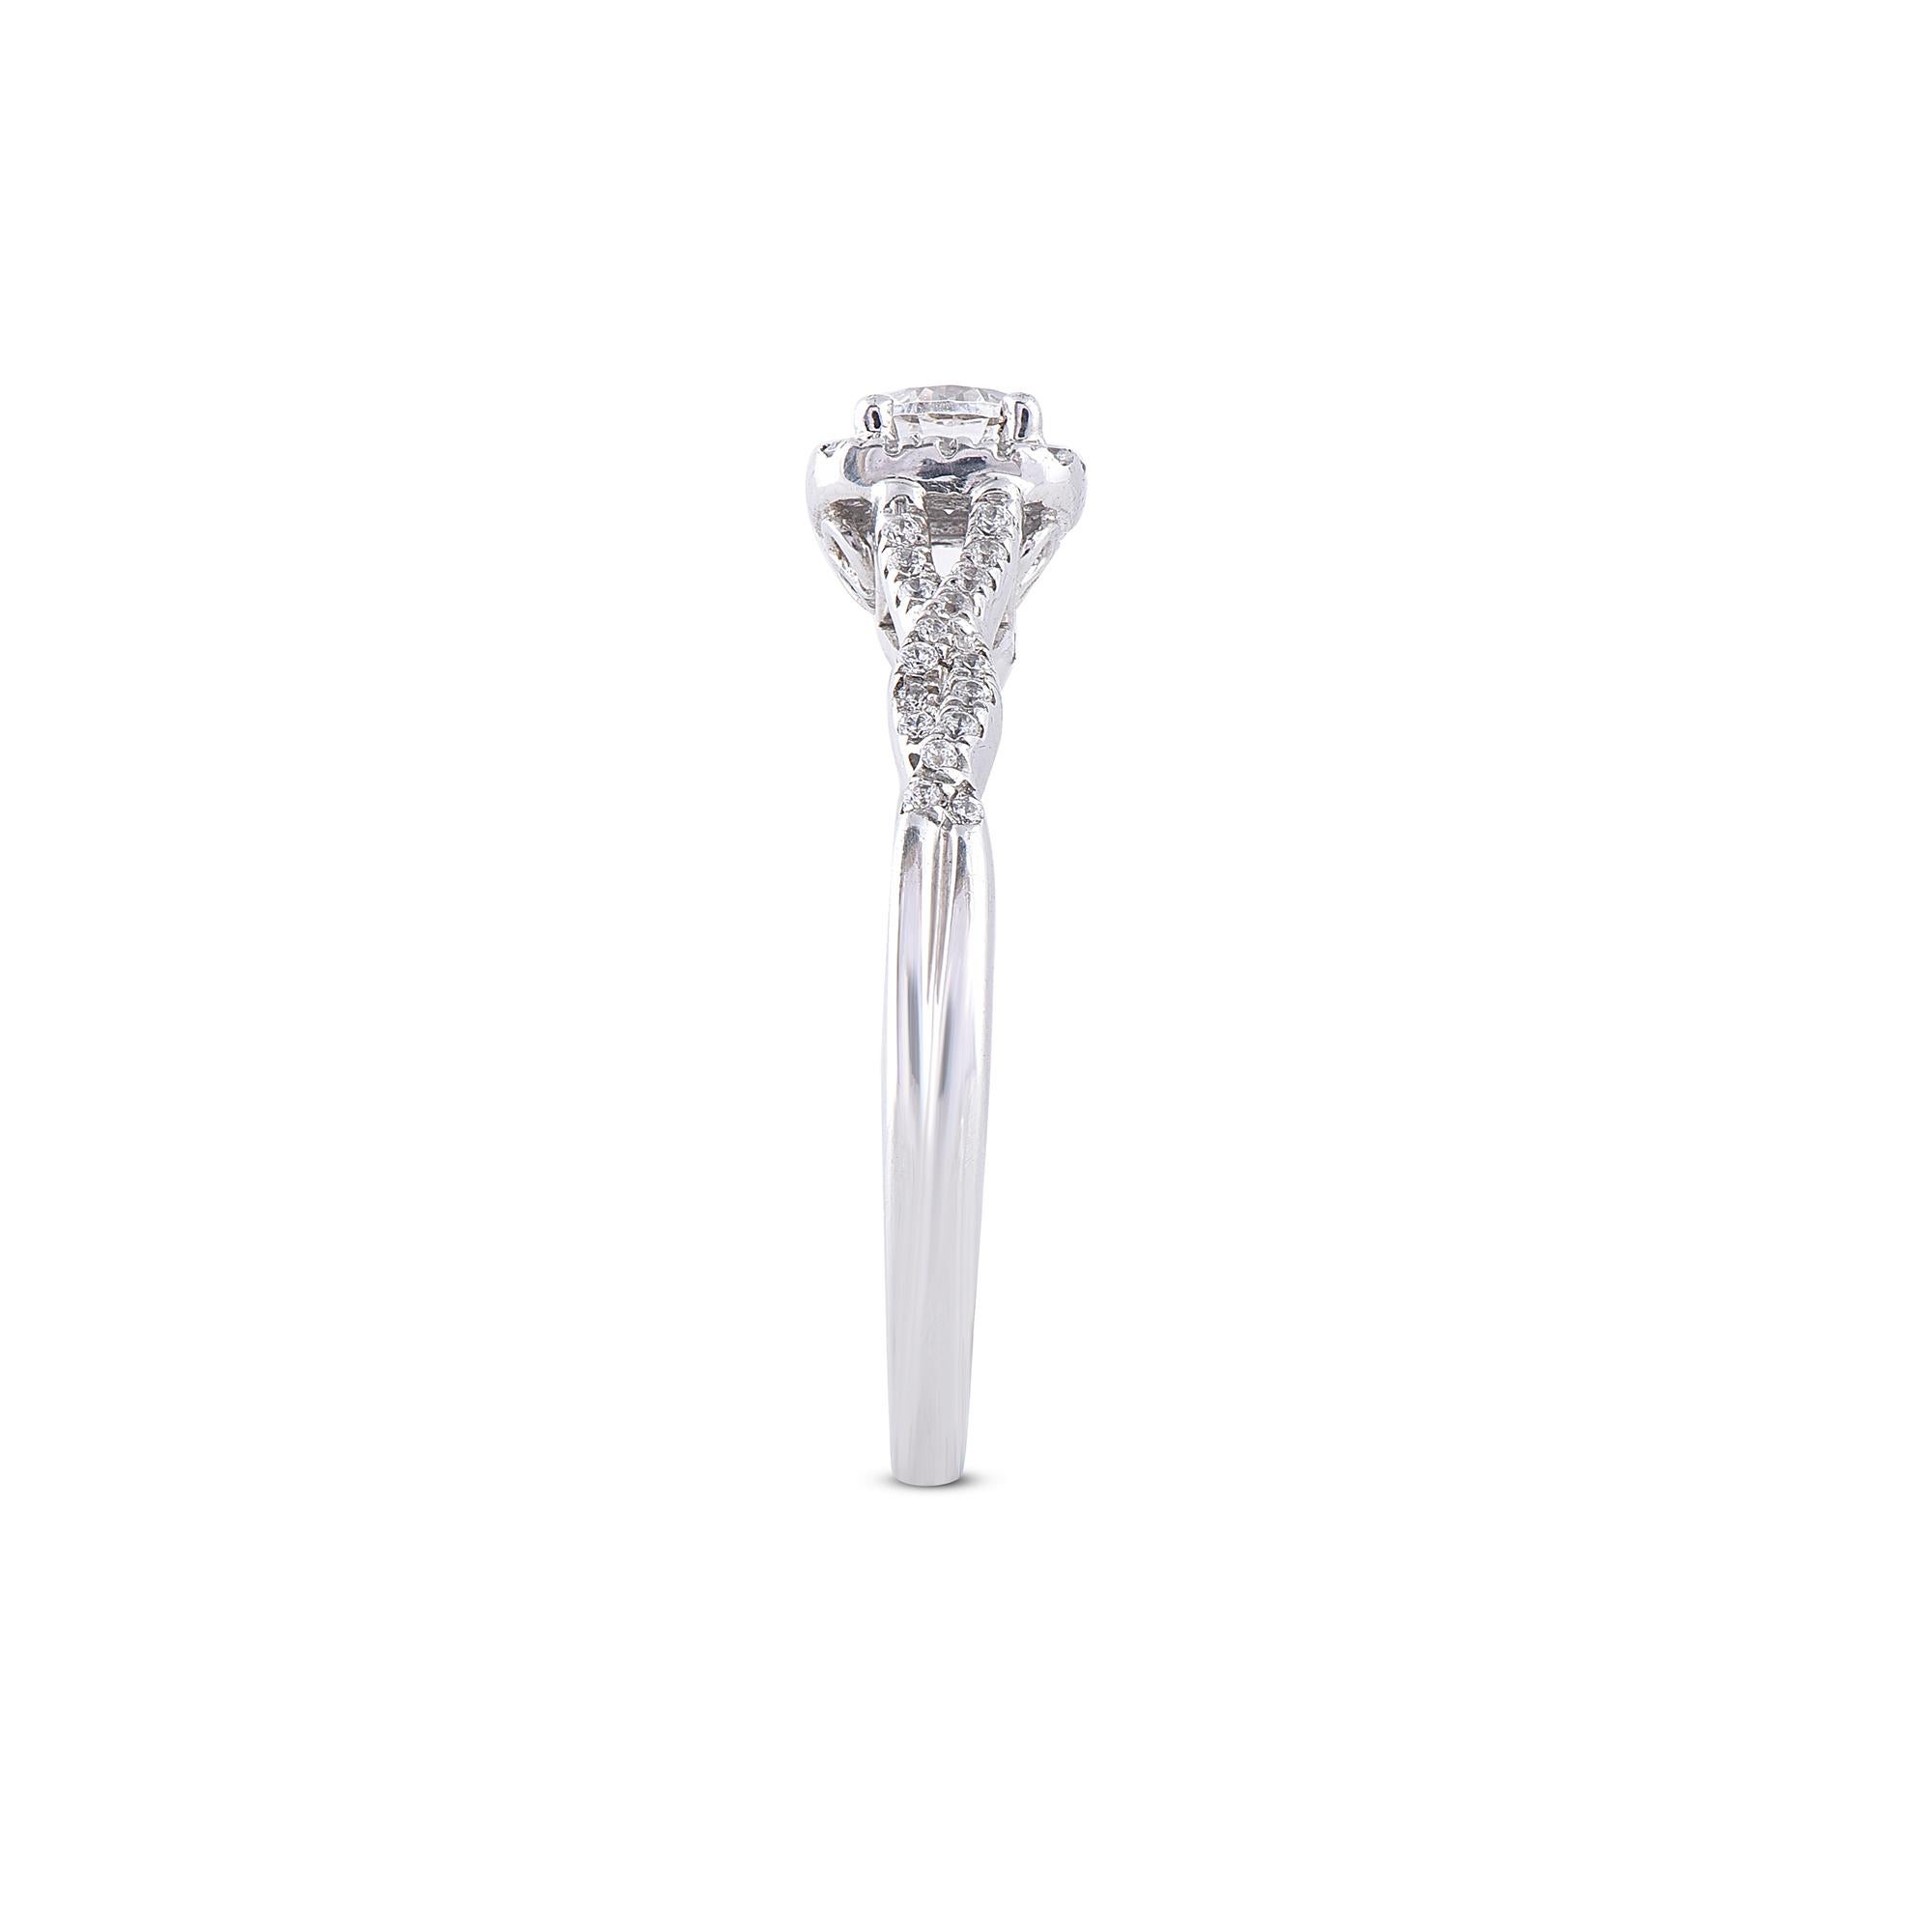 TJD 0.50 Carat Diamond 18 Karat White Gold Halo Twisted Shank Engagement Ring In New Condition For Sale In New York, NY